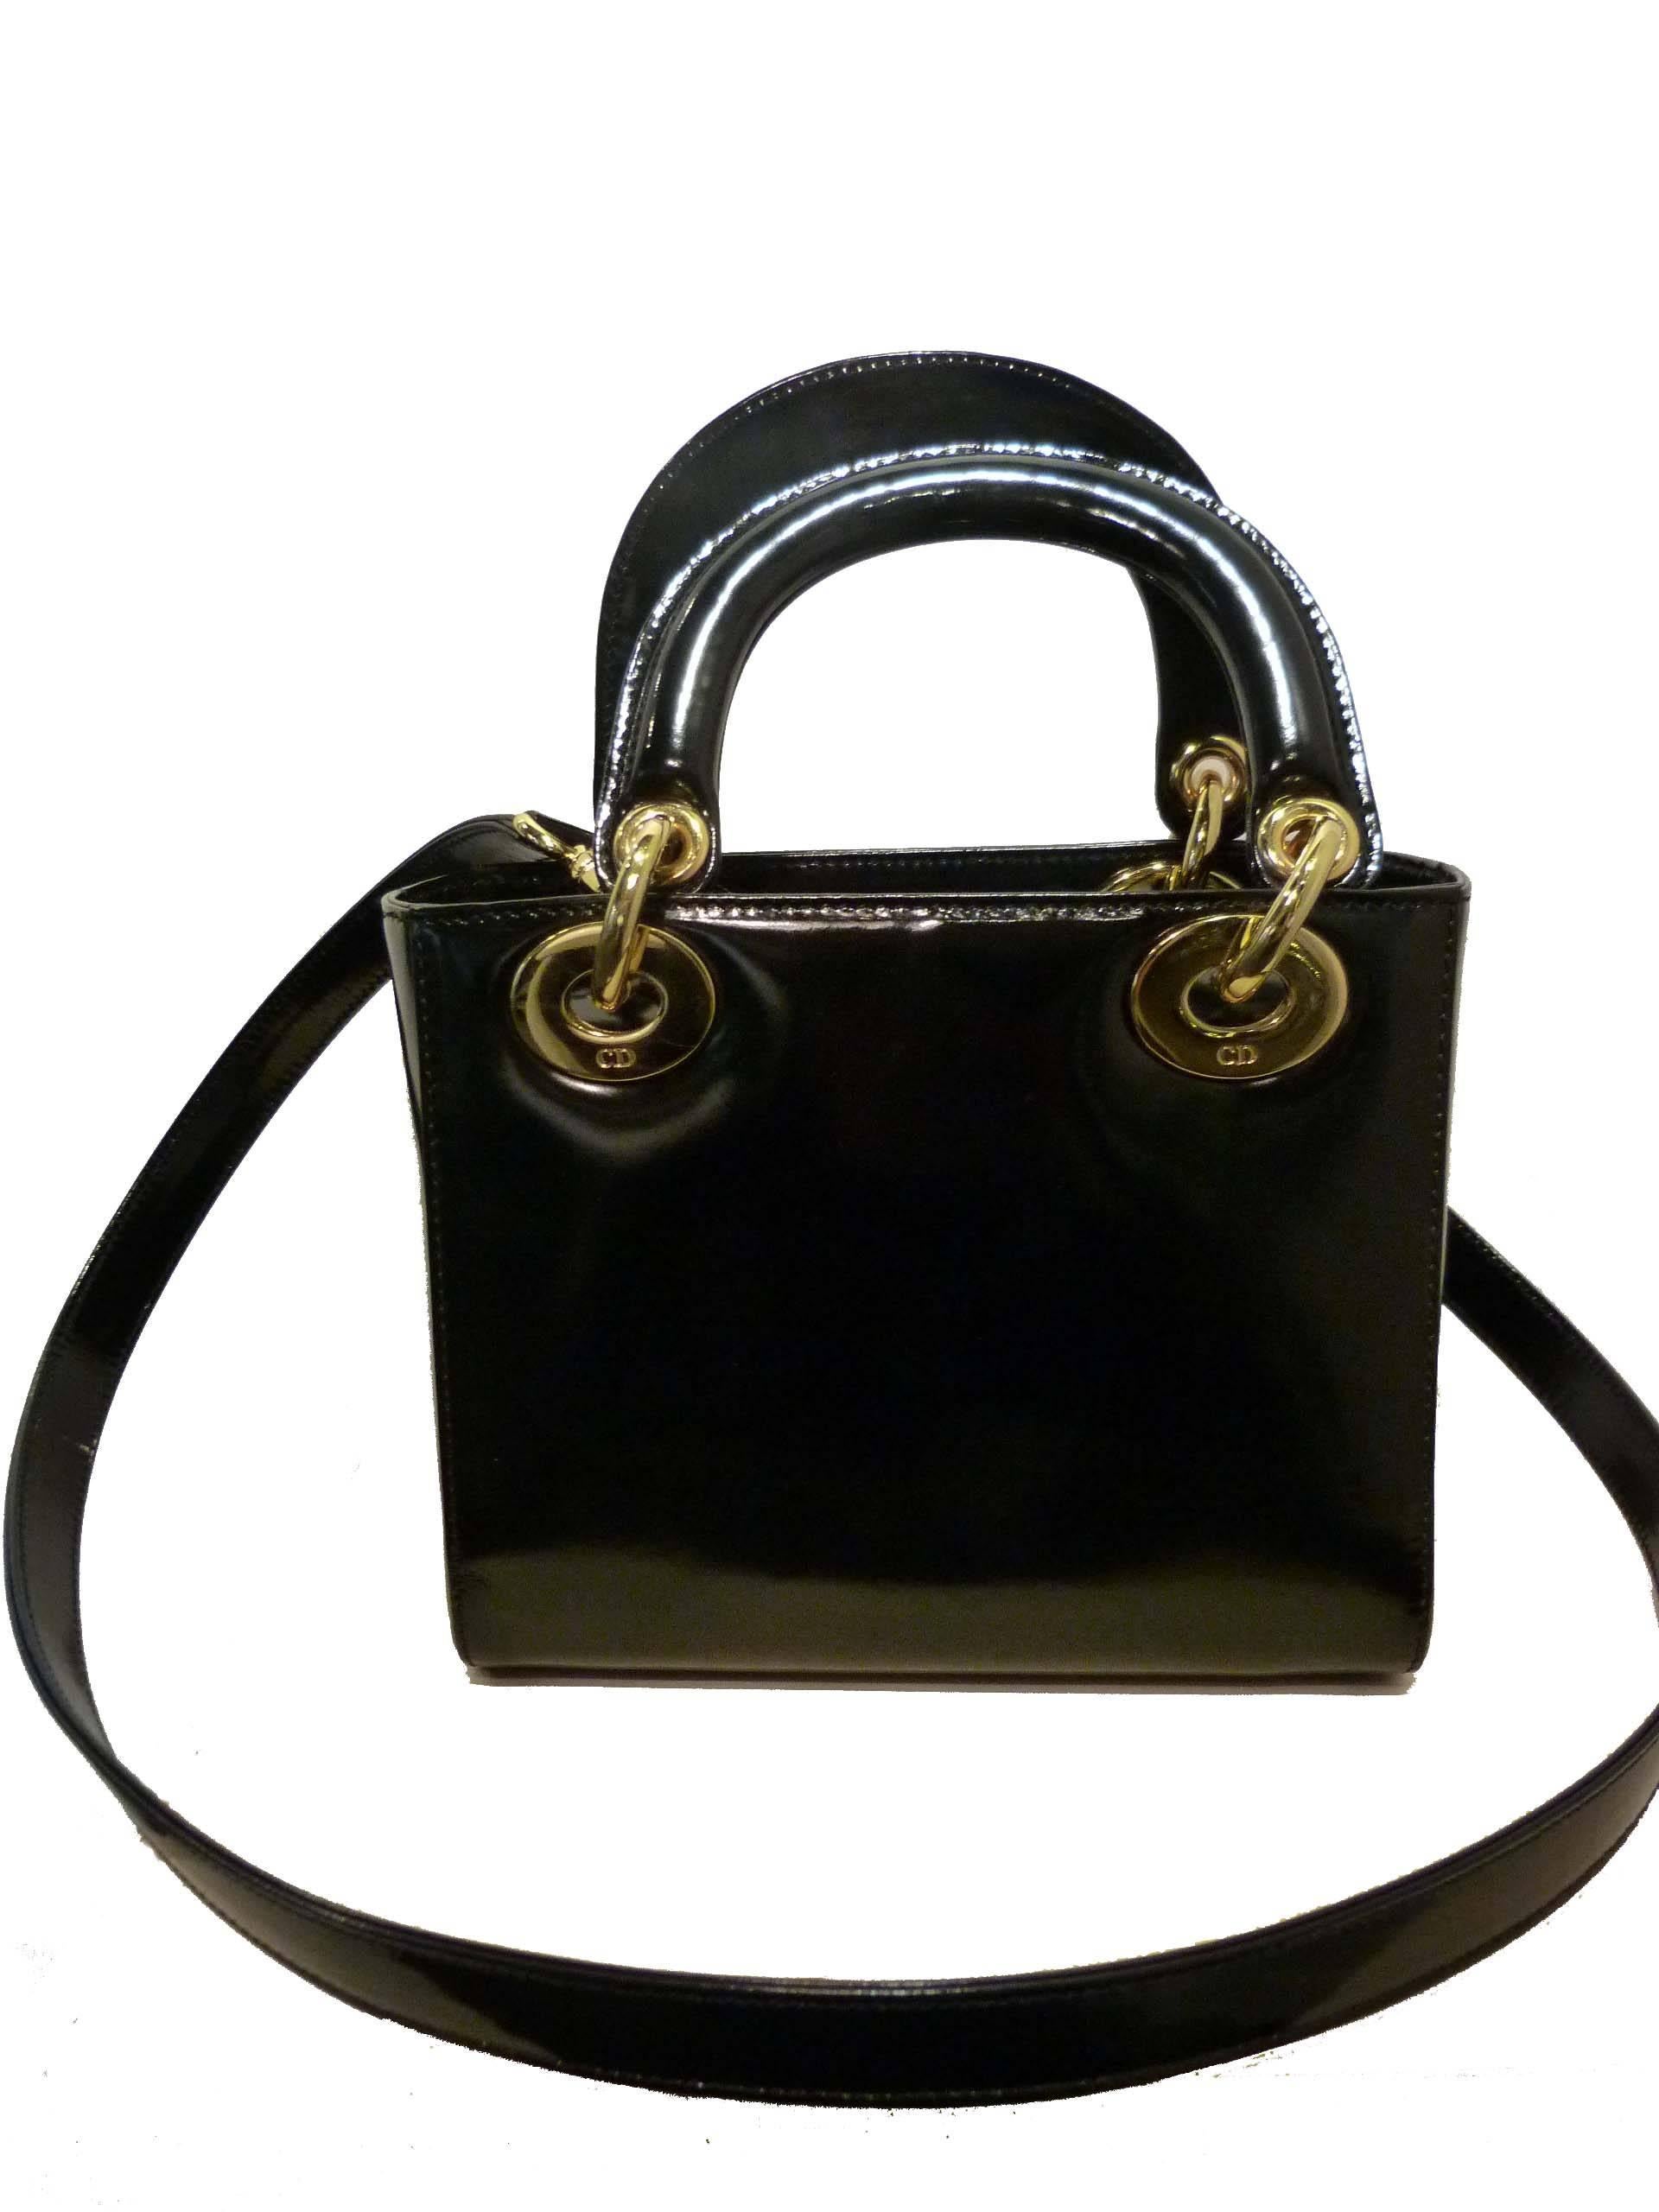 Bag Mini Lady Dior black patent leather, handle joined, shoulder strap, metal side gilded. 
Purse material : patent leather. 
Color : black. 
State : Really good condition. 
Season : fall/winter. 
External condition : Very good, very small